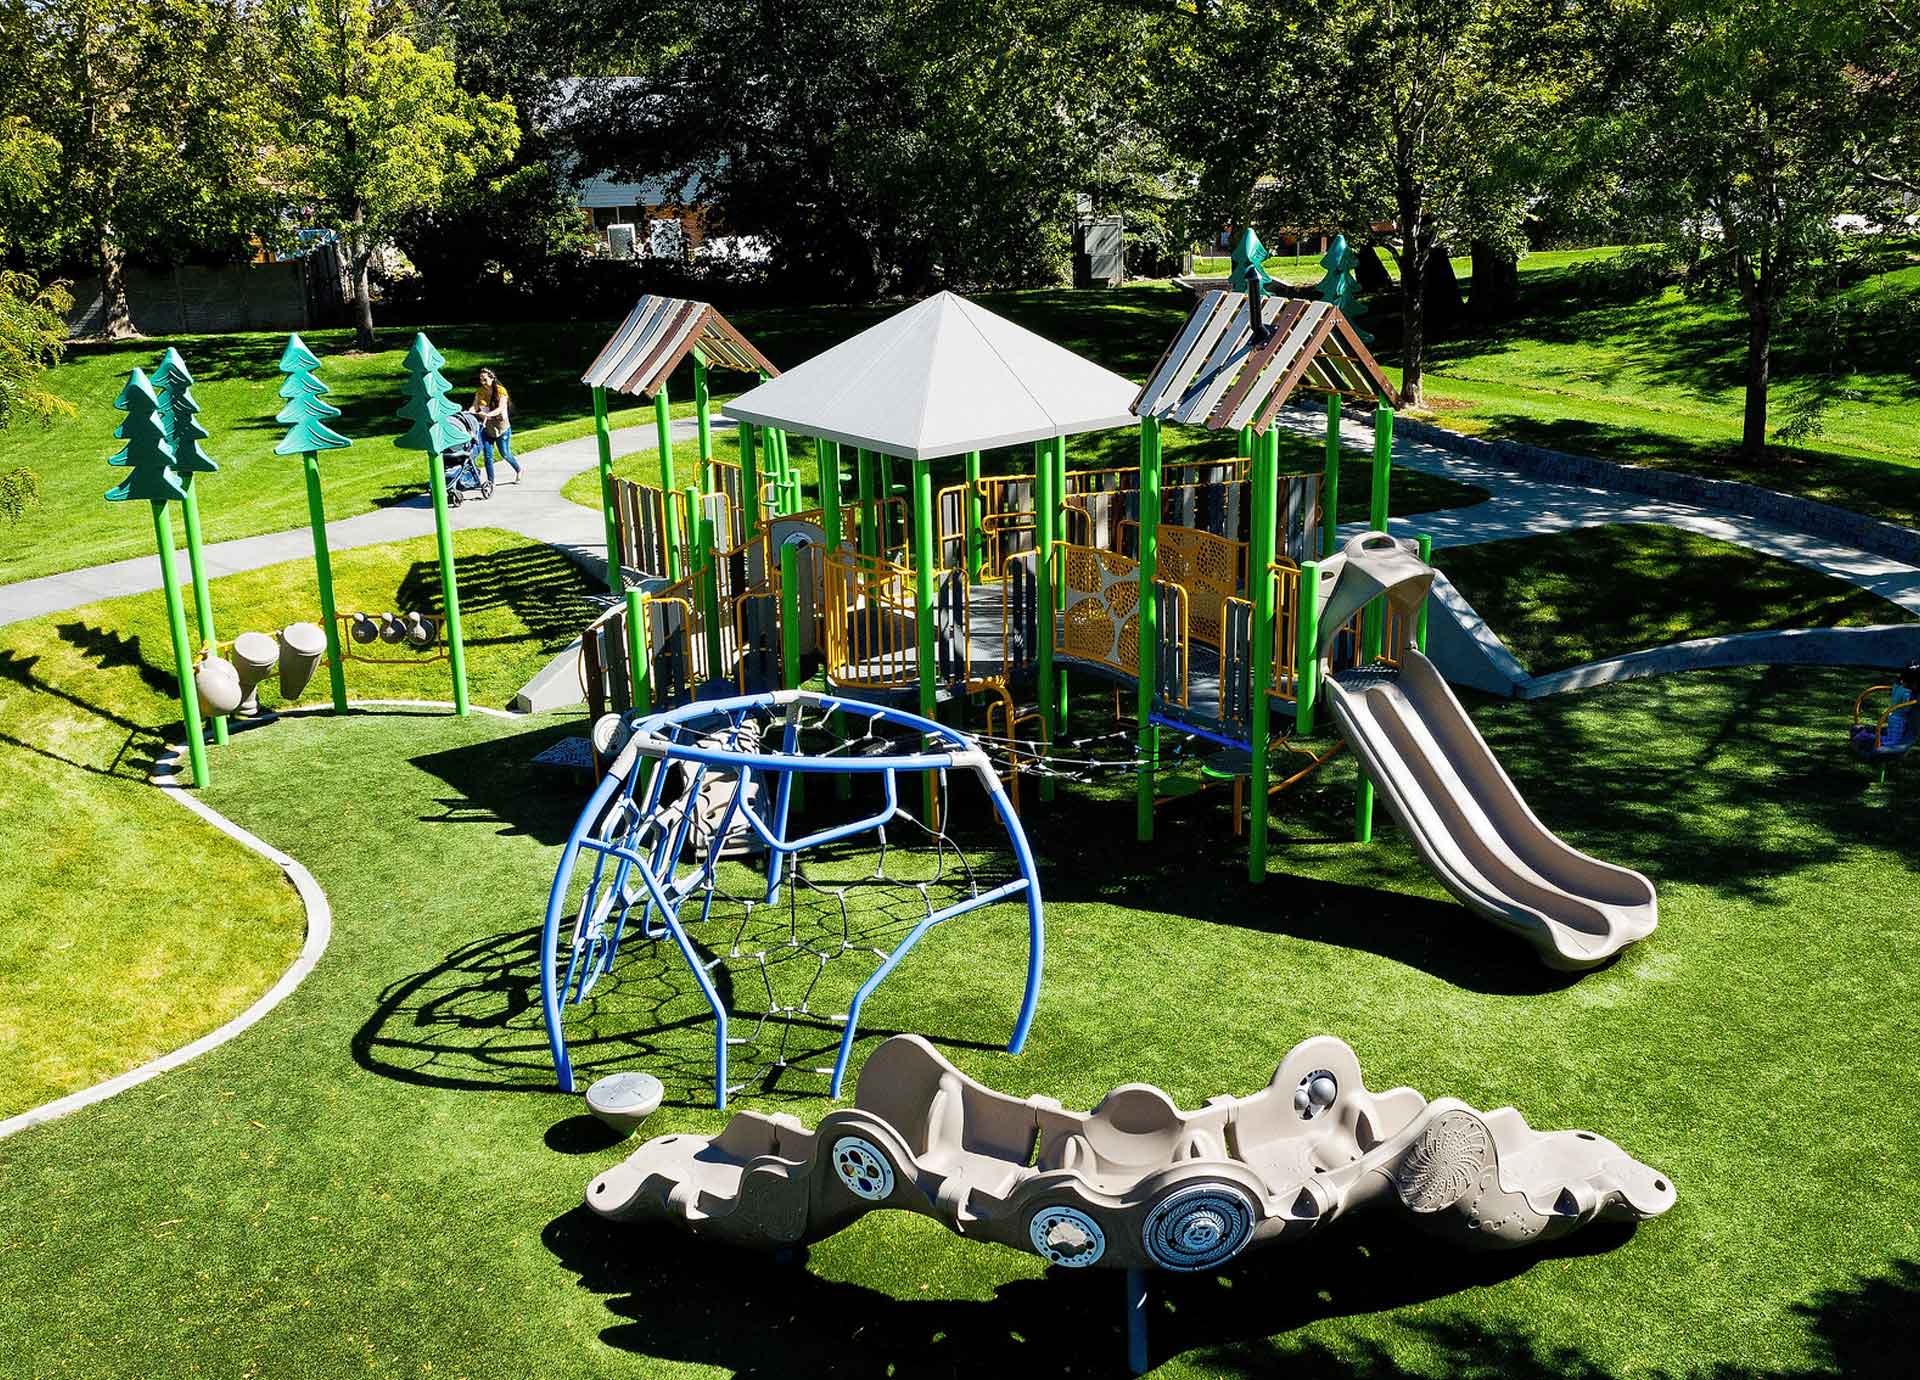 What You Should Know About Installing Your Playground